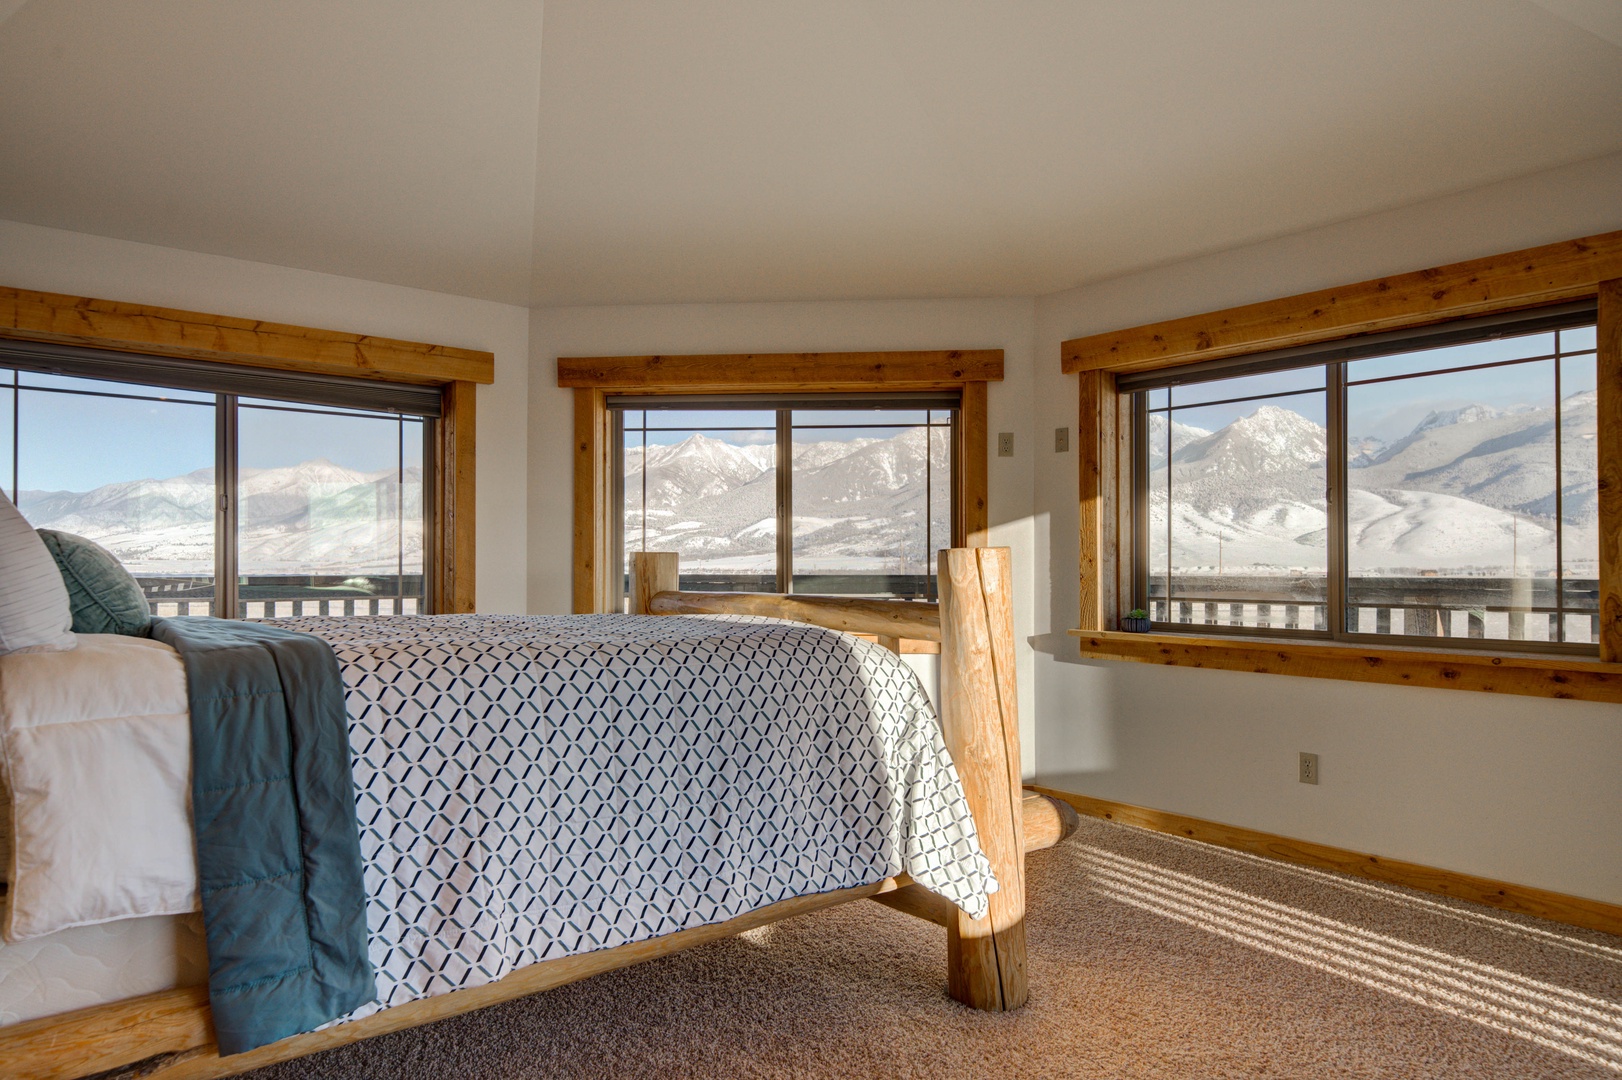 Livingston Vacation Rentals, OFB Sunset Grove - Natural light coming in in primary bedroom